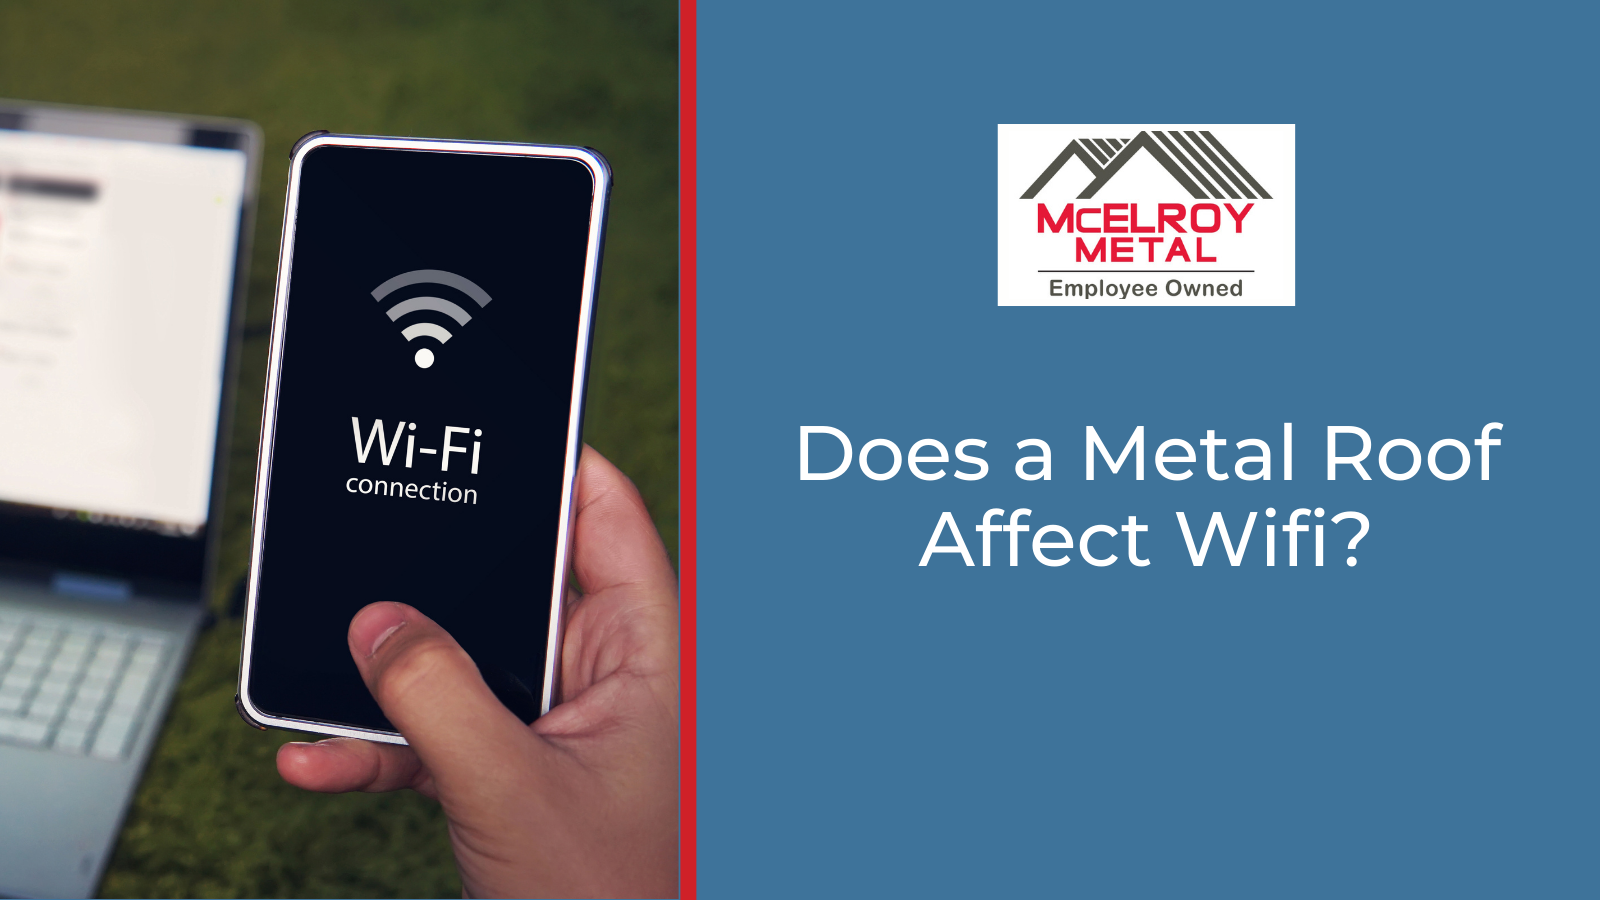 Does a Metal Roof Affect Wifi?